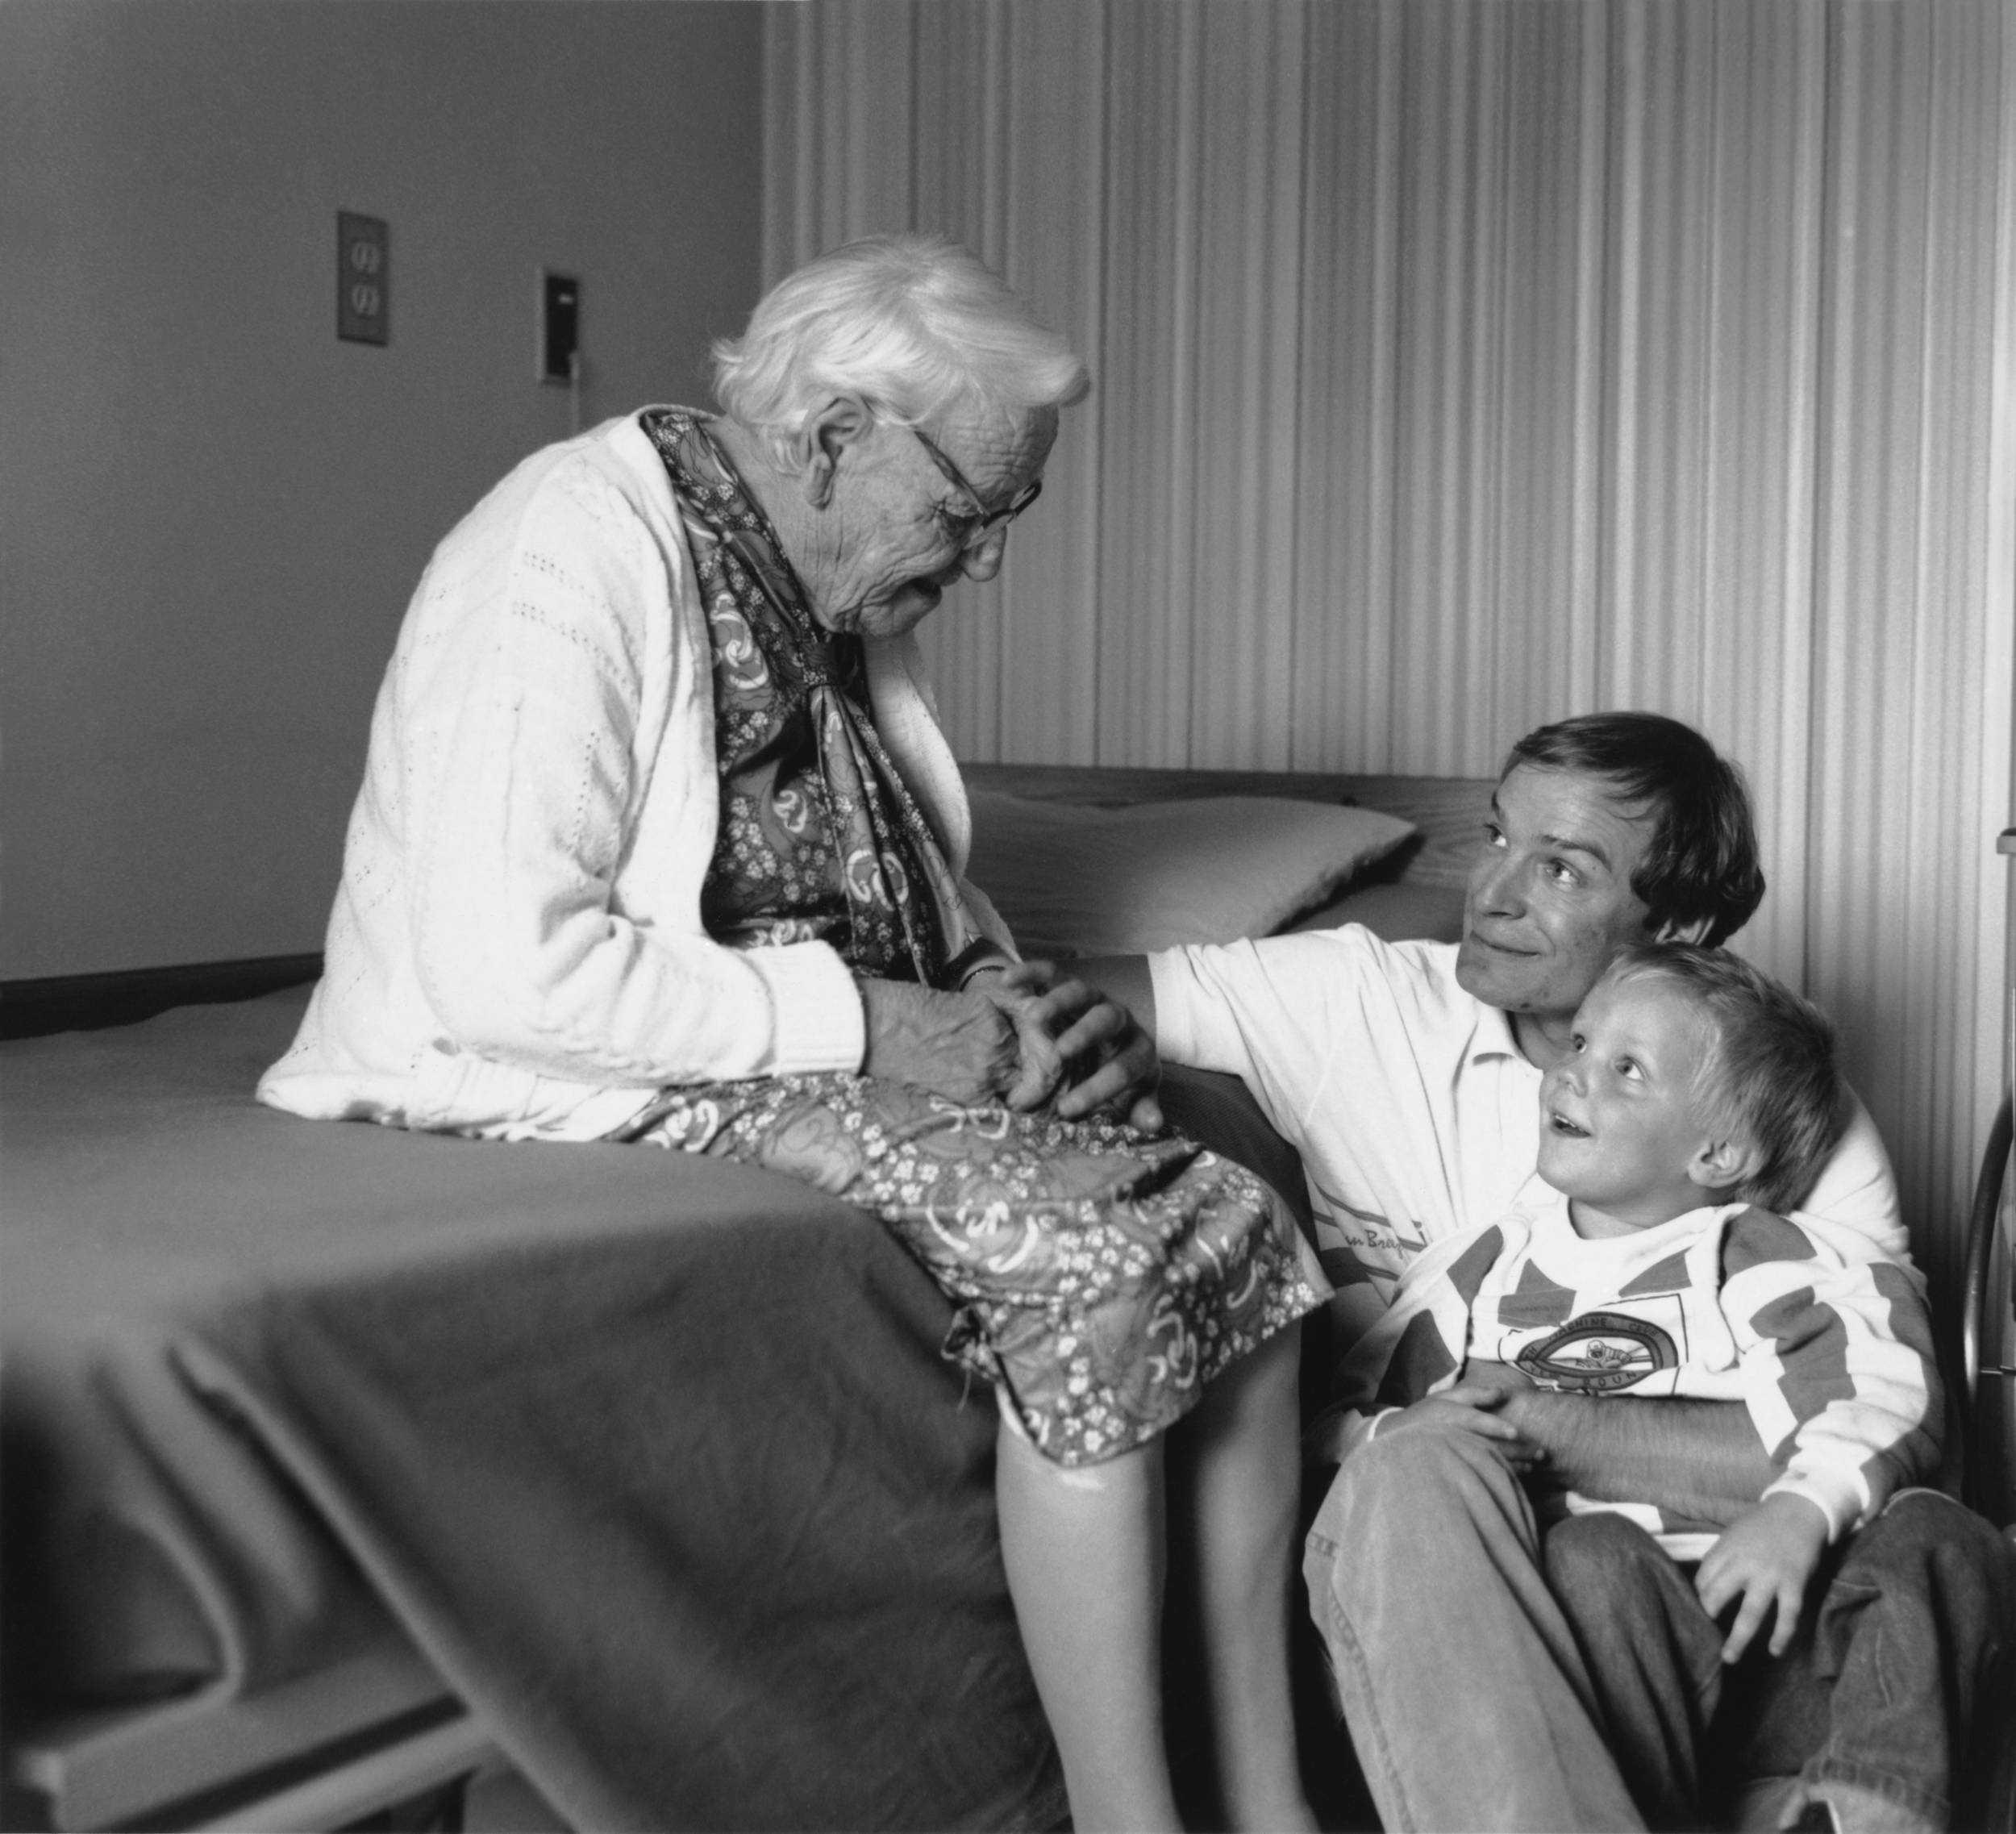 Black and white photo of elderly woman seated on bed looking over at son and grandchild who are both looking up at grandma with adoration.